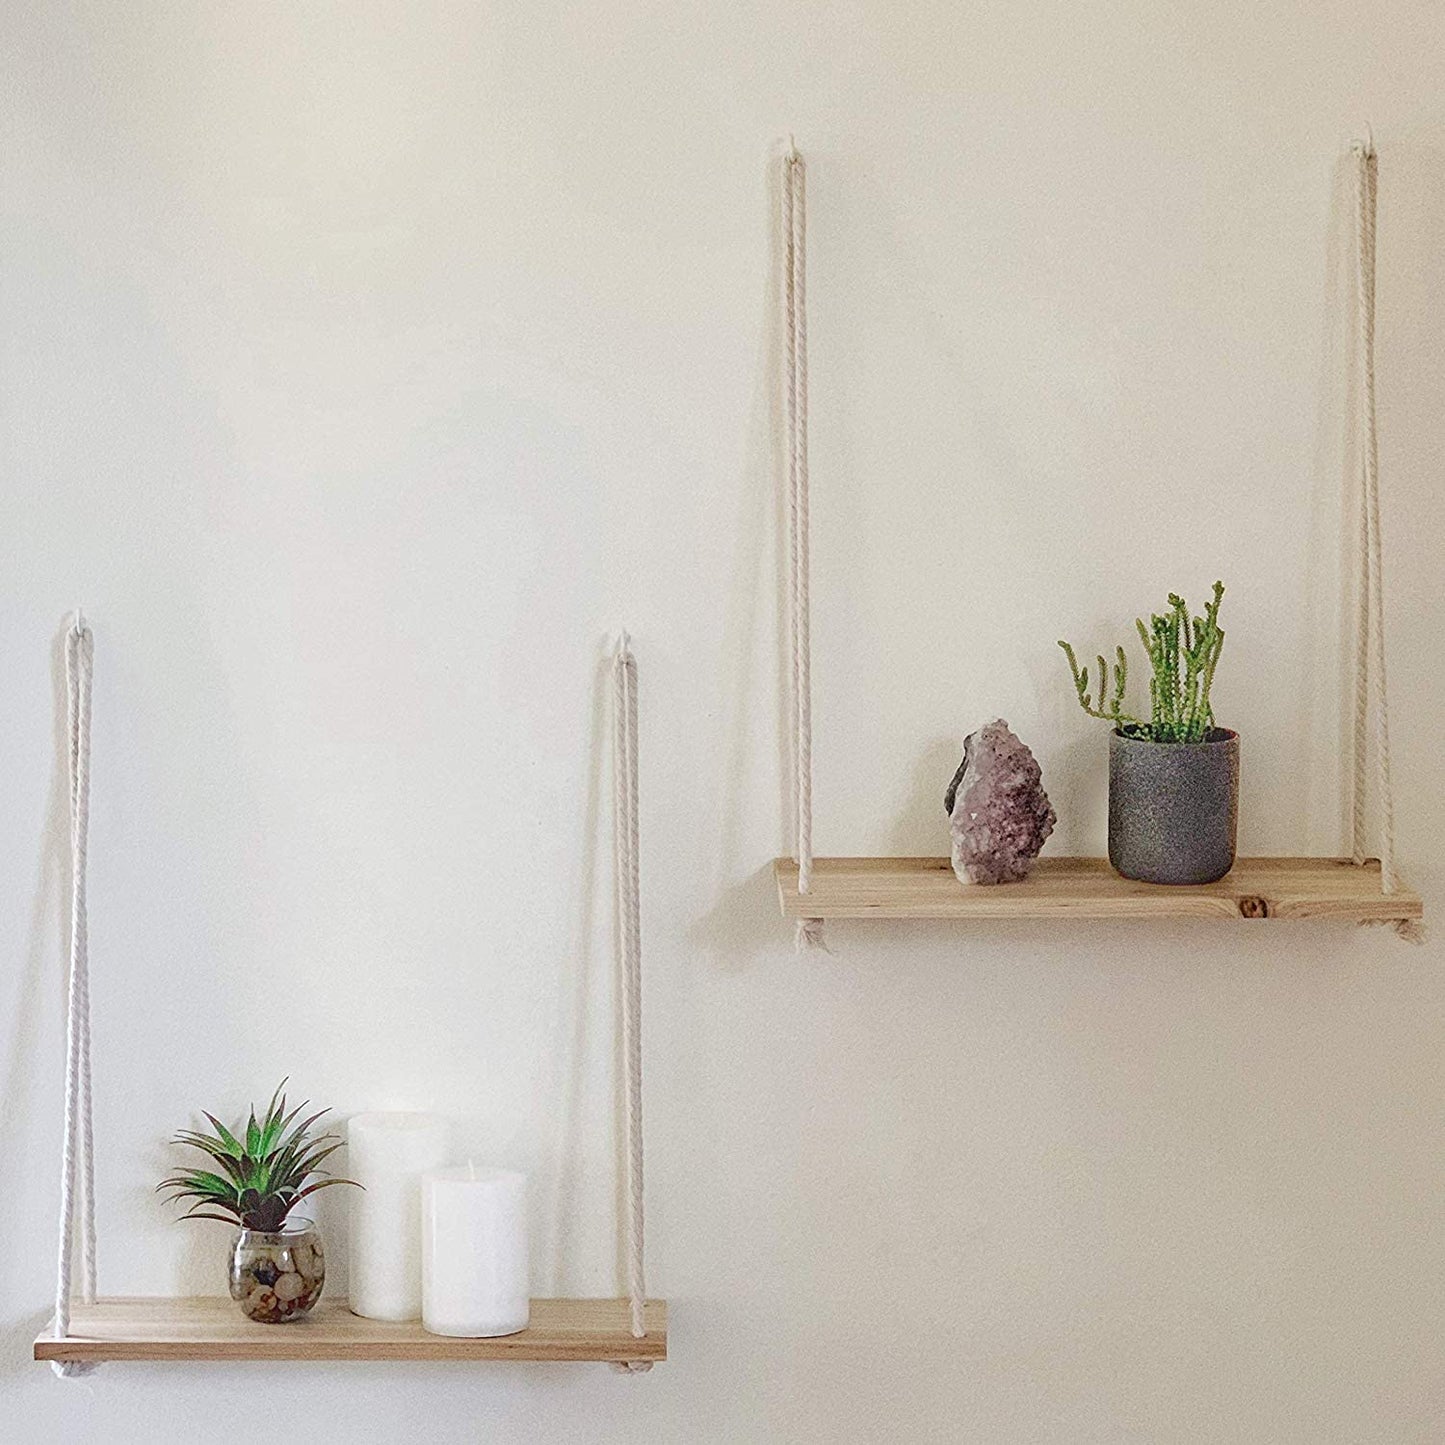 Beautiful Wooden Rope Swing Floating Wall Shelves